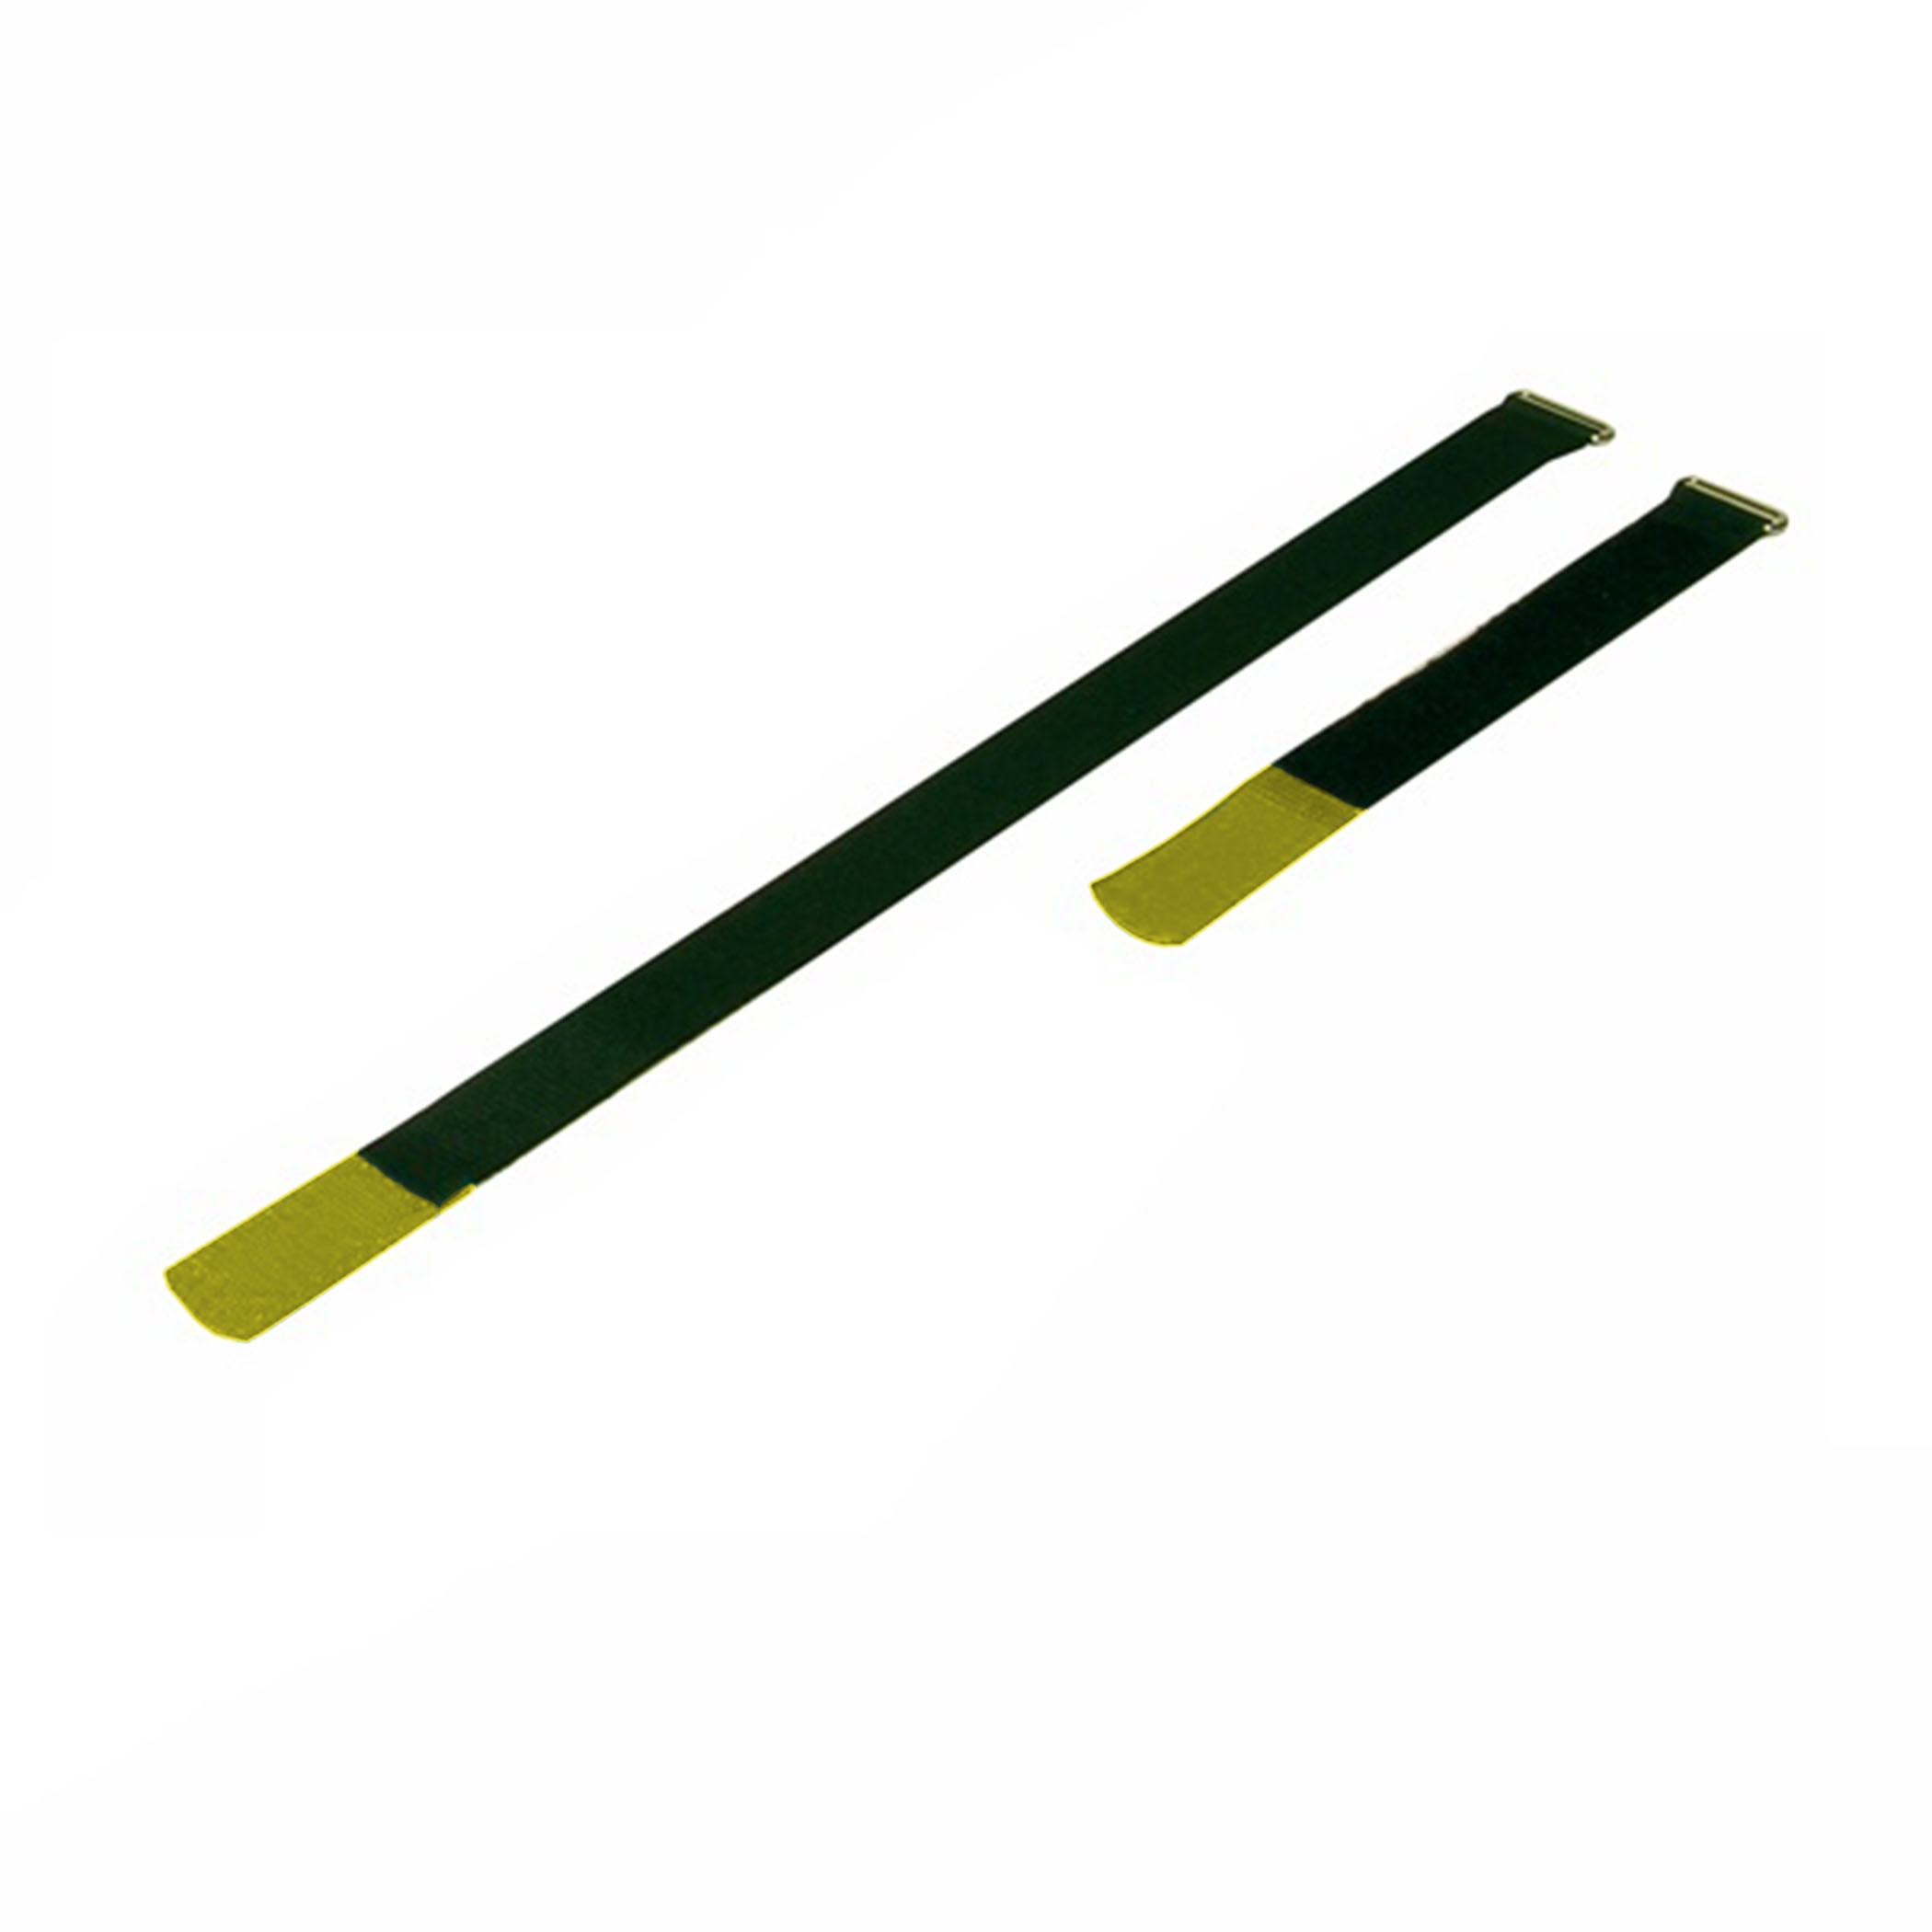 Cable Tie 410x25mm with Hook Yellow, (10 pieces) - a2541-700h